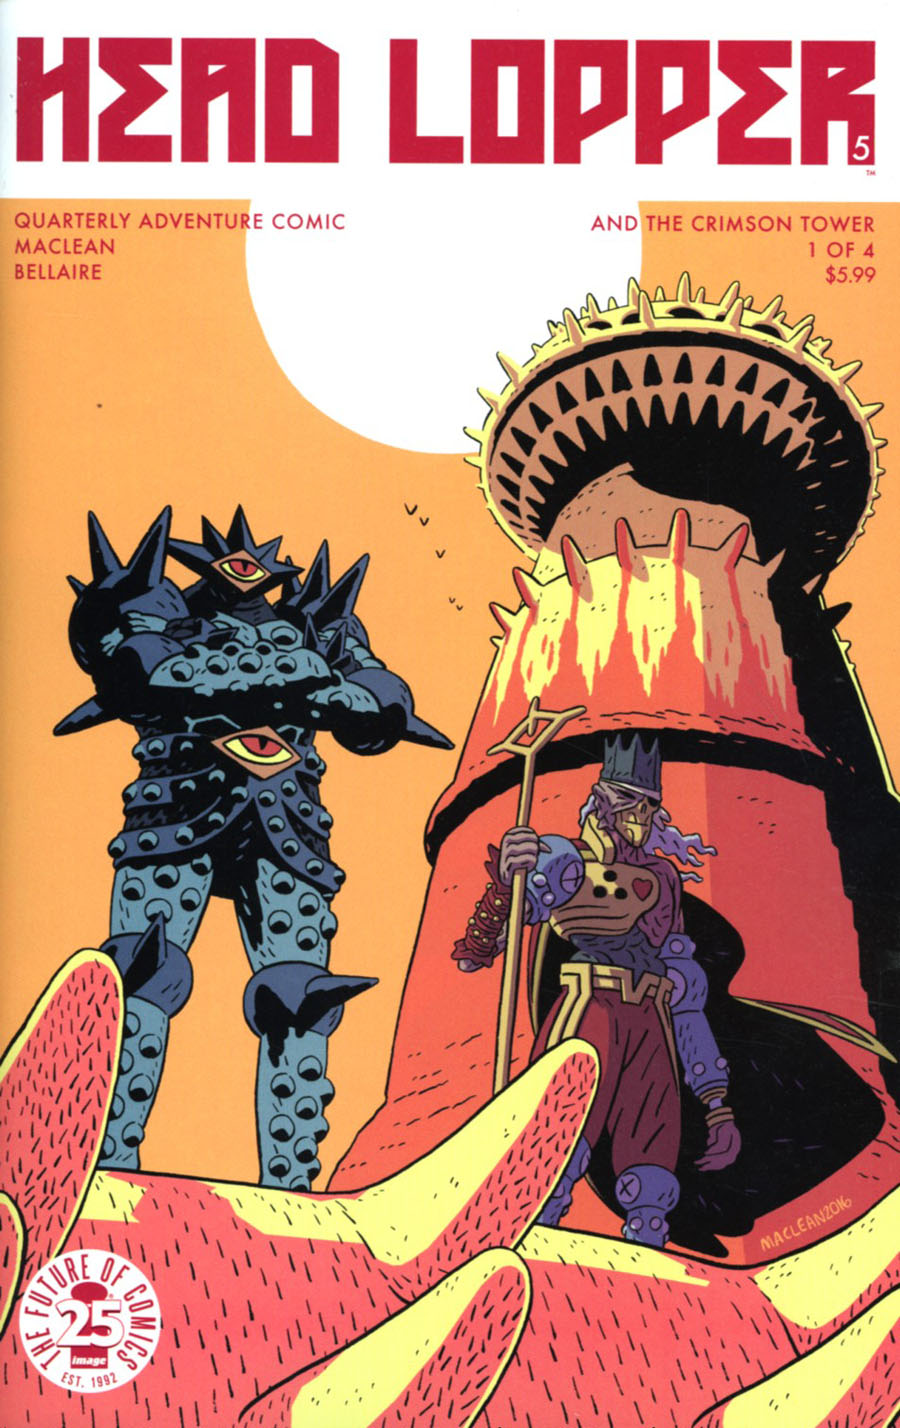 Head Lopper #5 Cover A Andrew MacLean